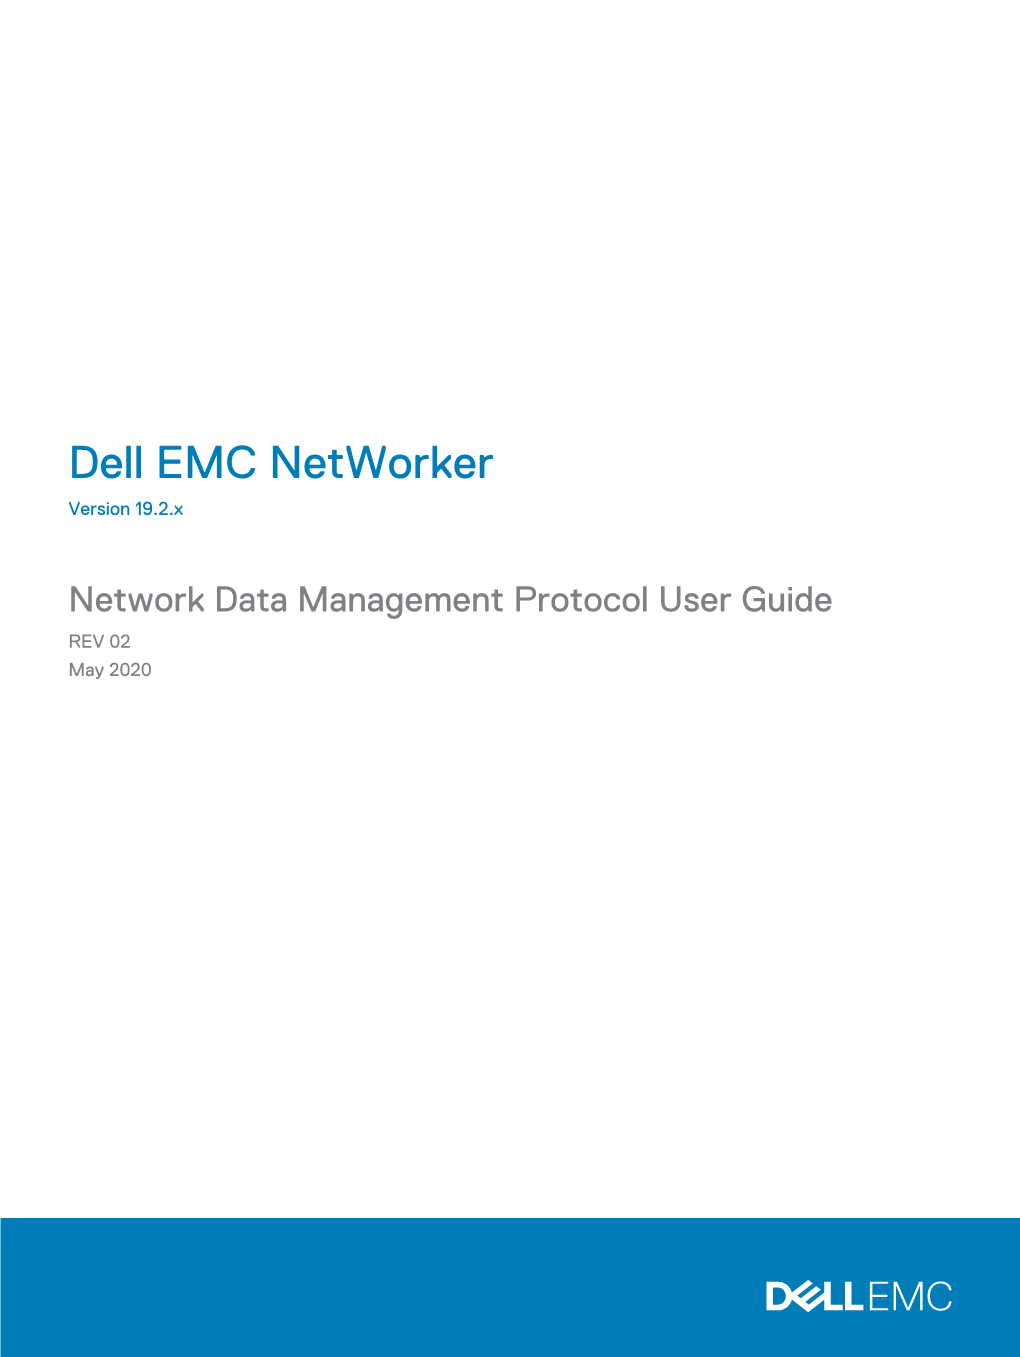 Dell EMC Networker Network Data Management Protocol User Guide CONTENTS